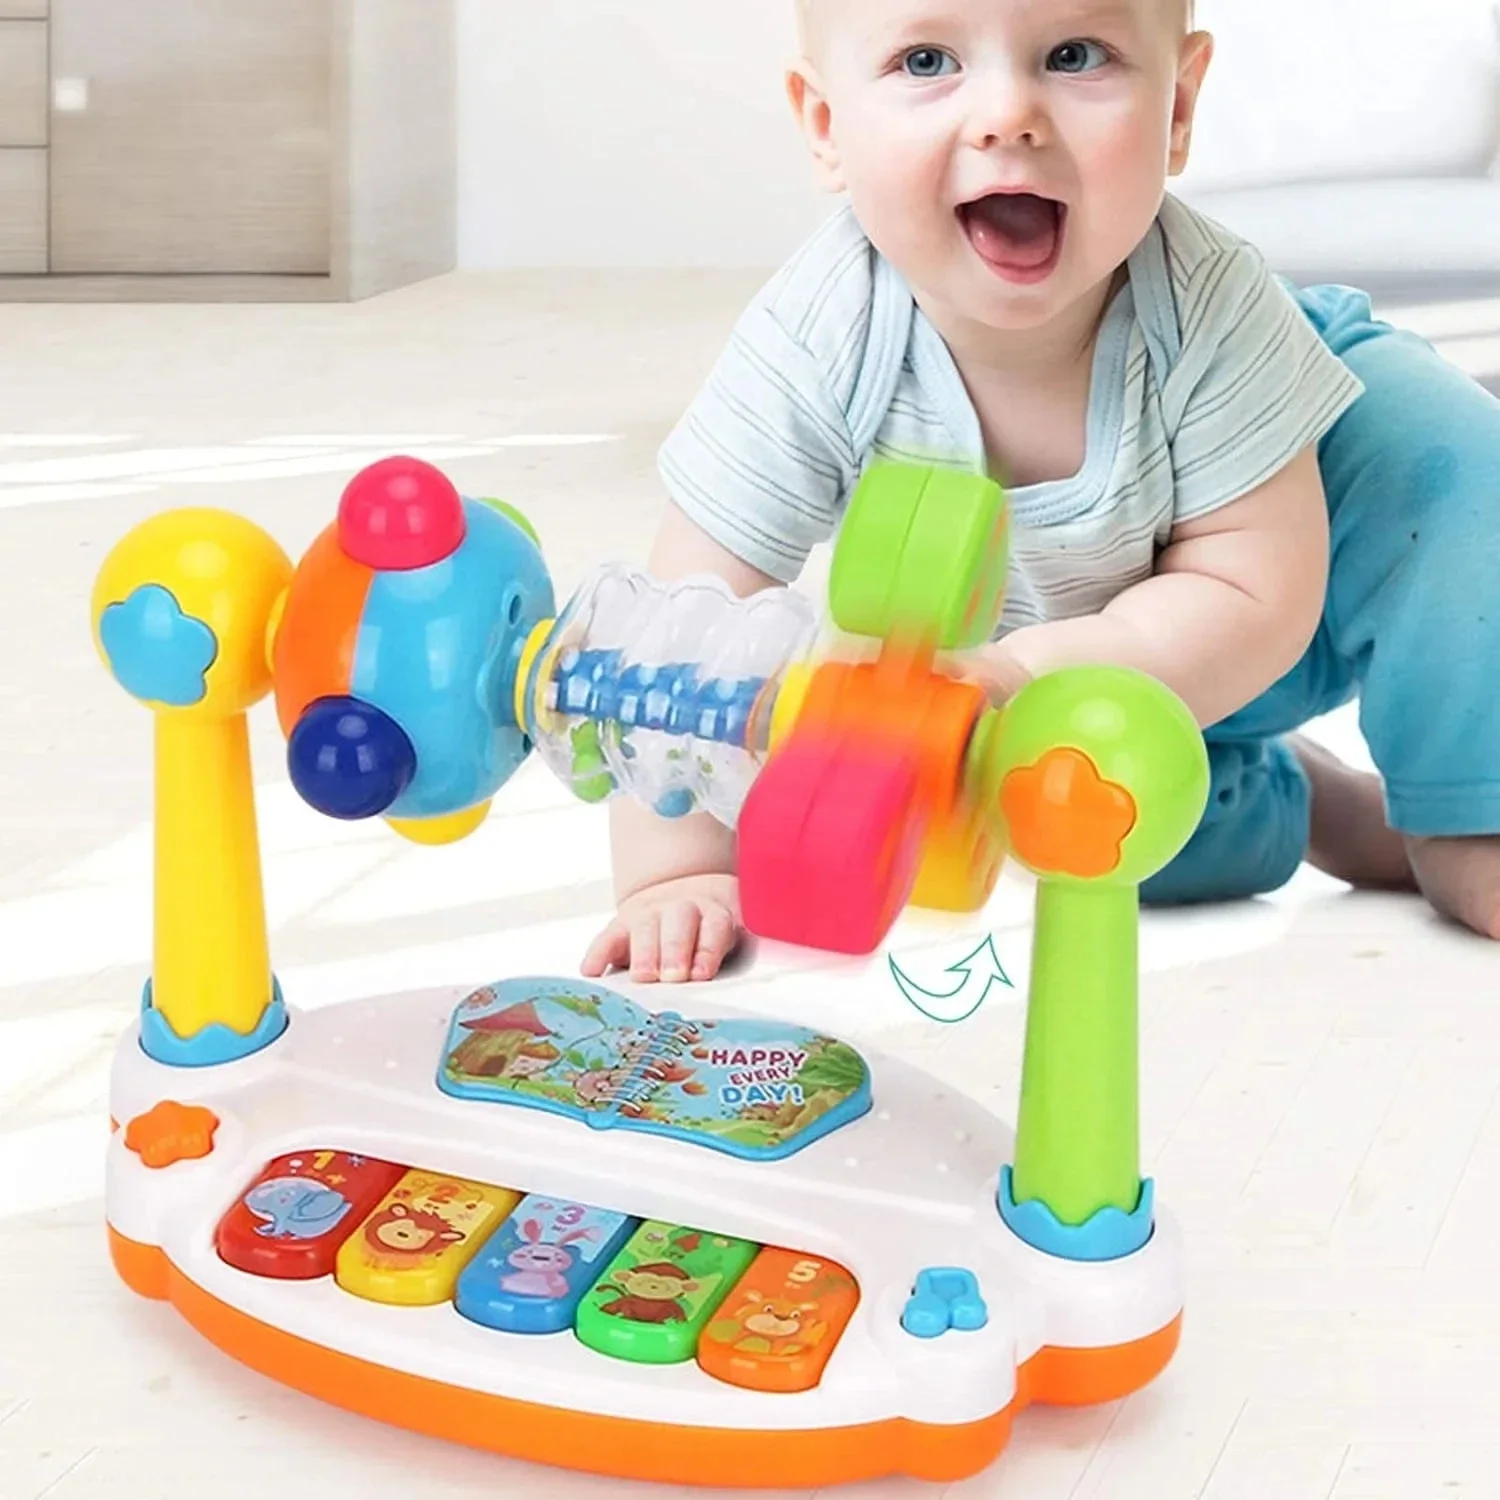 

New Baby Early Educational rattle toys Children light whack-a-mole Music Kingdom electronic organ toy Piano Keyboard for Toddler